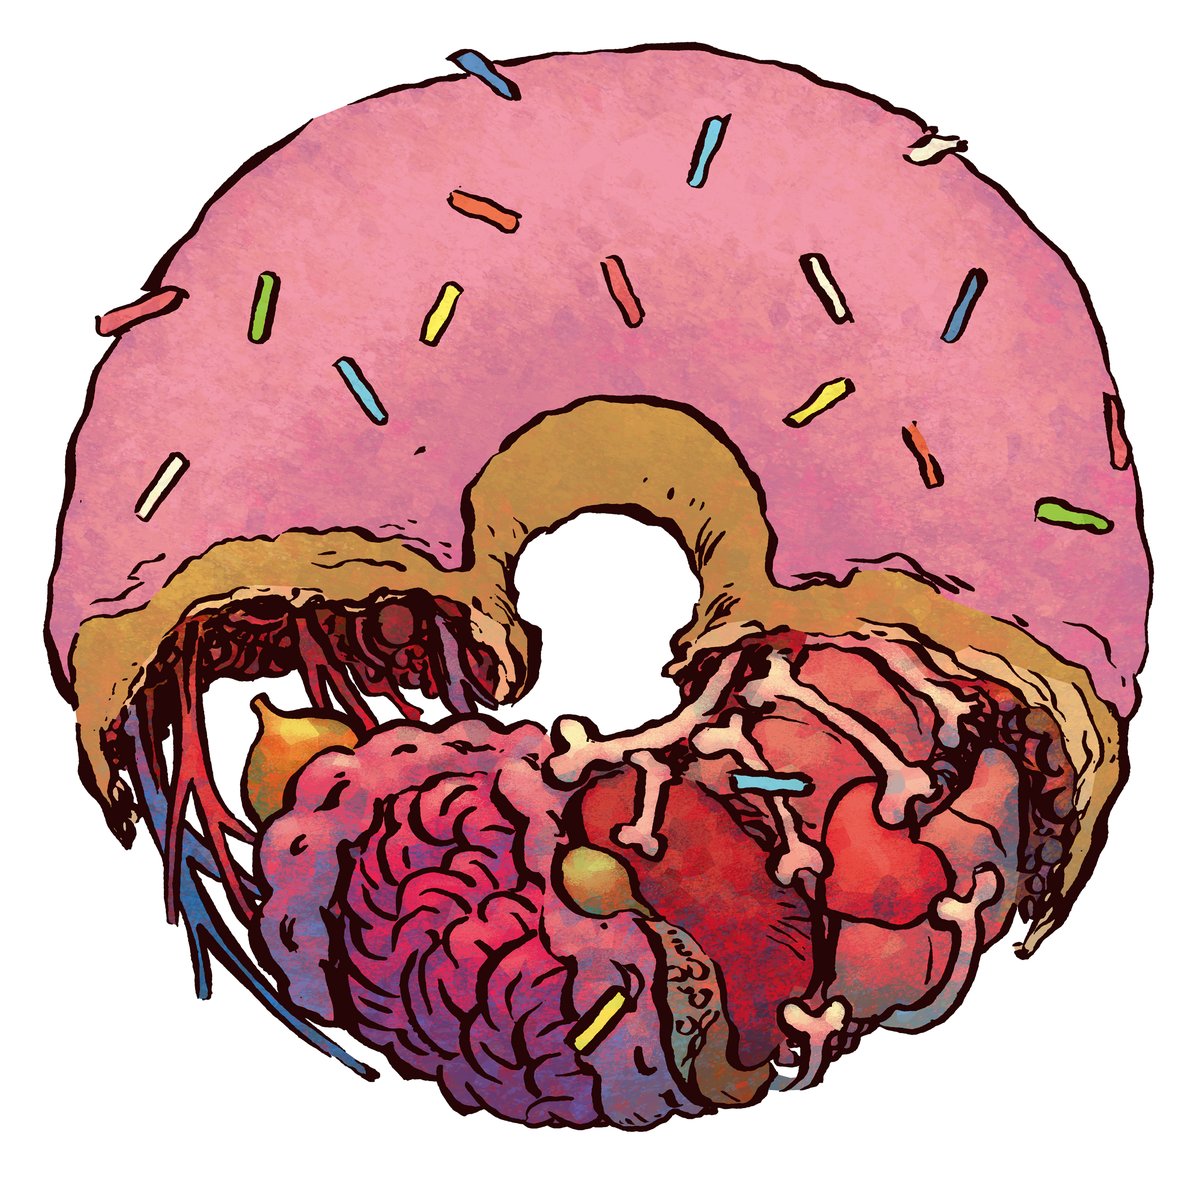 「The REAL Anatomical Donut. 」|Jesse Lonergan @ home 😵‍💫のイラスト